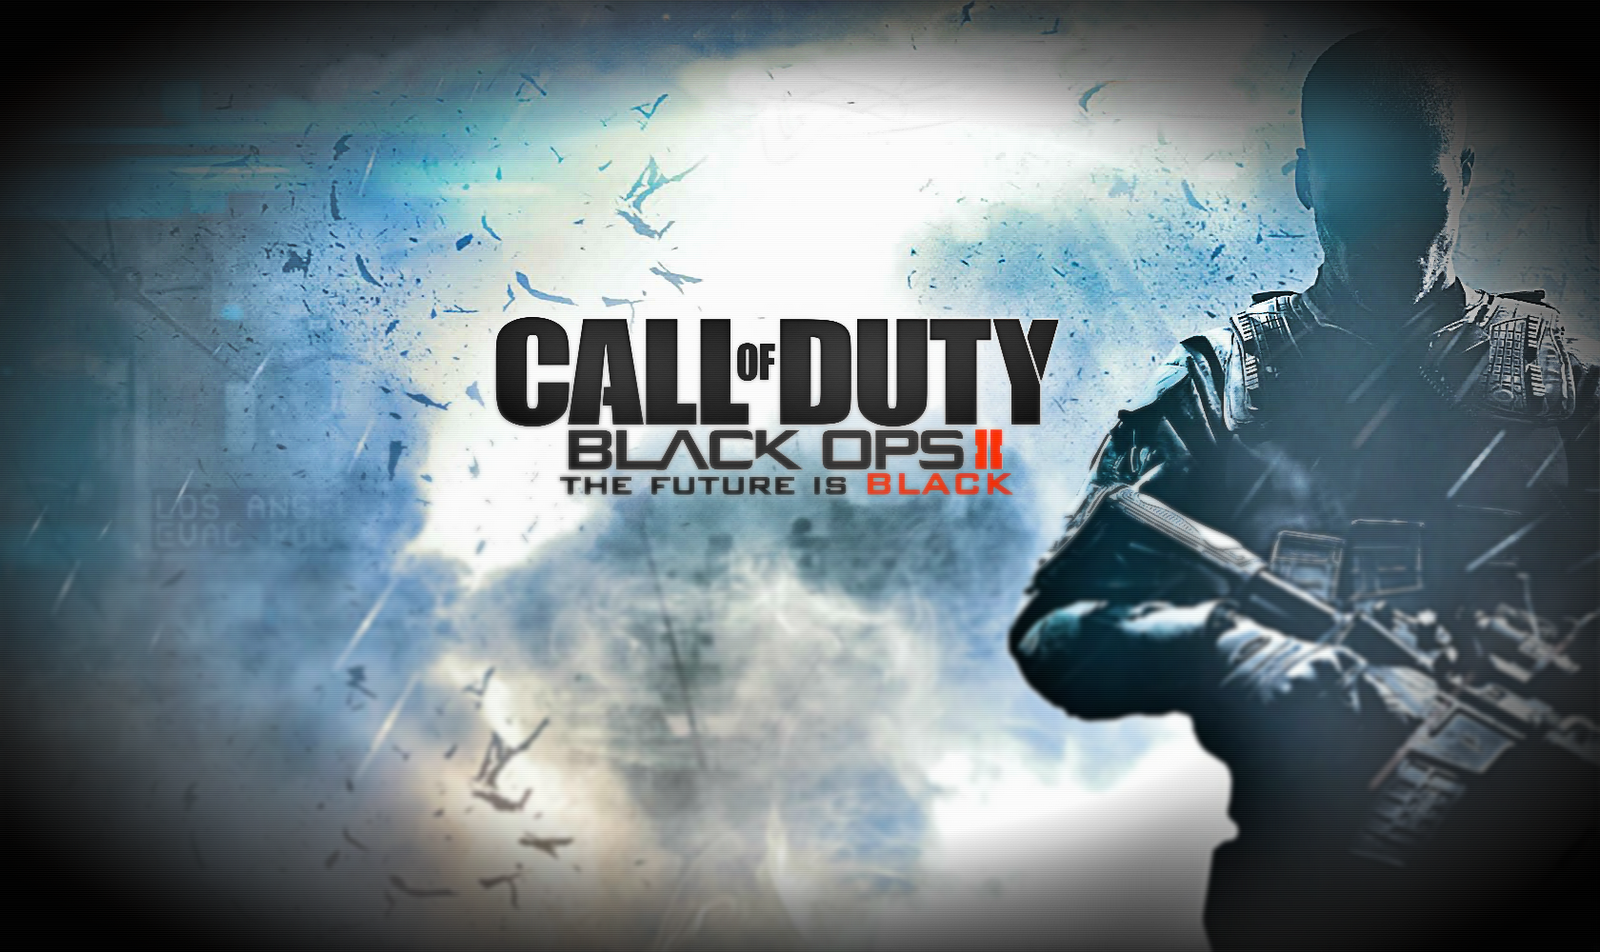 HD WALLPAPERS Call of Duty Black ops 2 HD Backgrounds